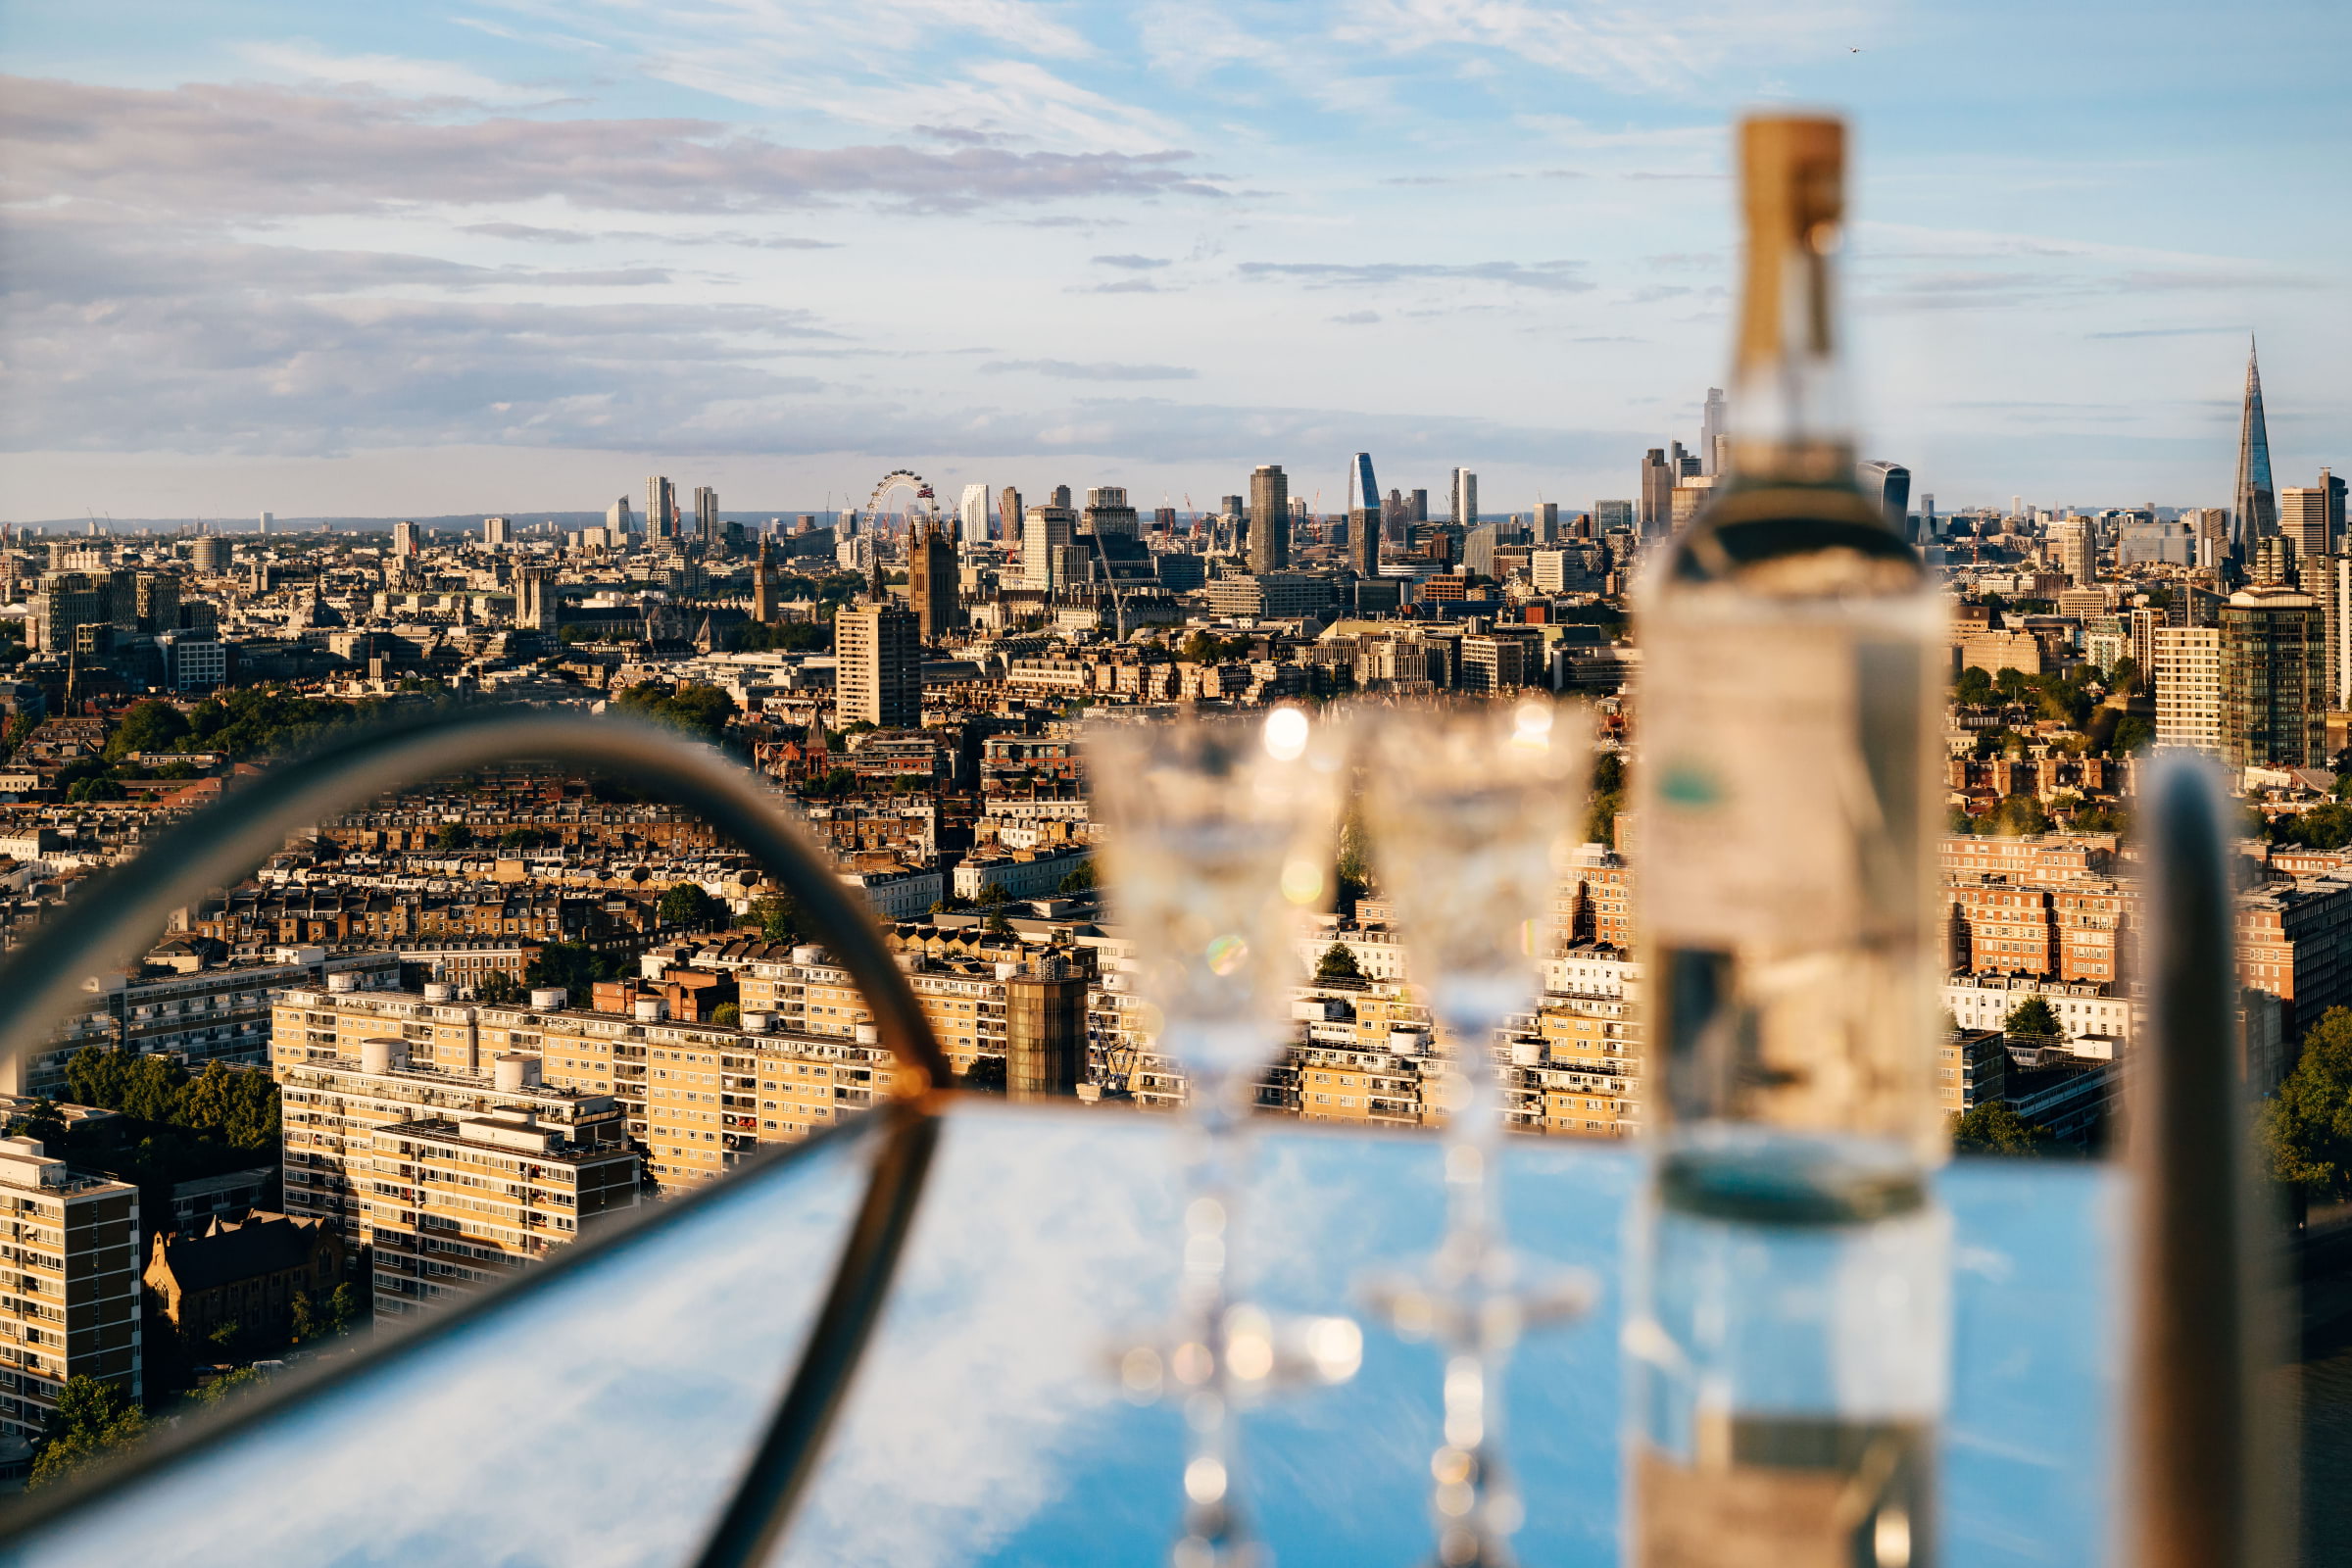 Celebrate National Tequila Day with shots high above the city